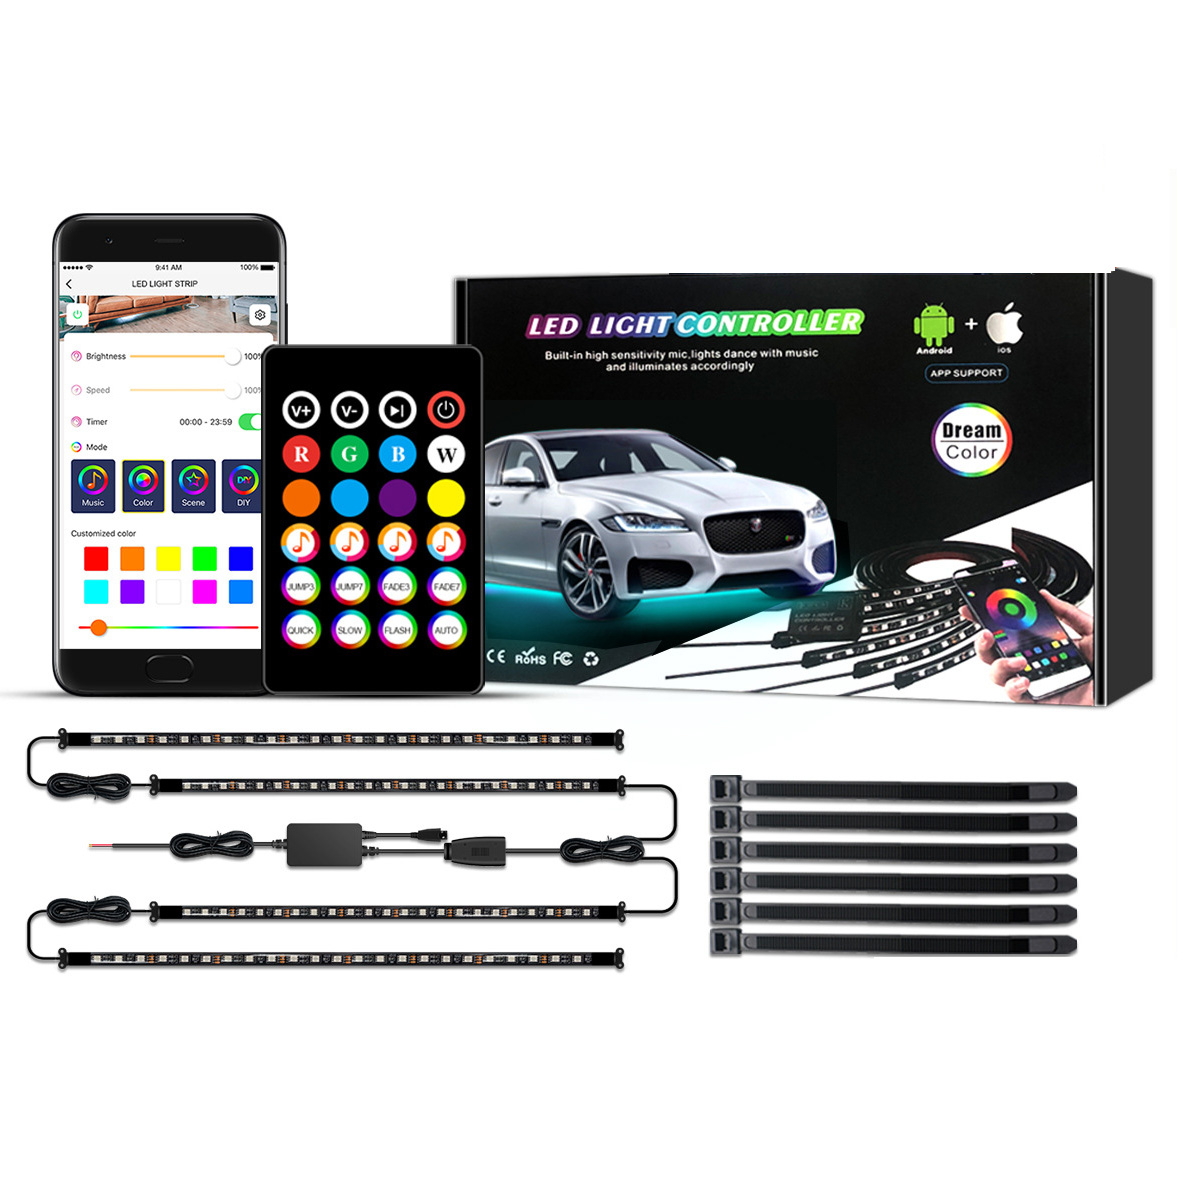 DC12V Waterproof SMD5050 LED Car Atmosphere Music Jump Light Strip and Bluetooth Controller with RF Remote and APP control kit